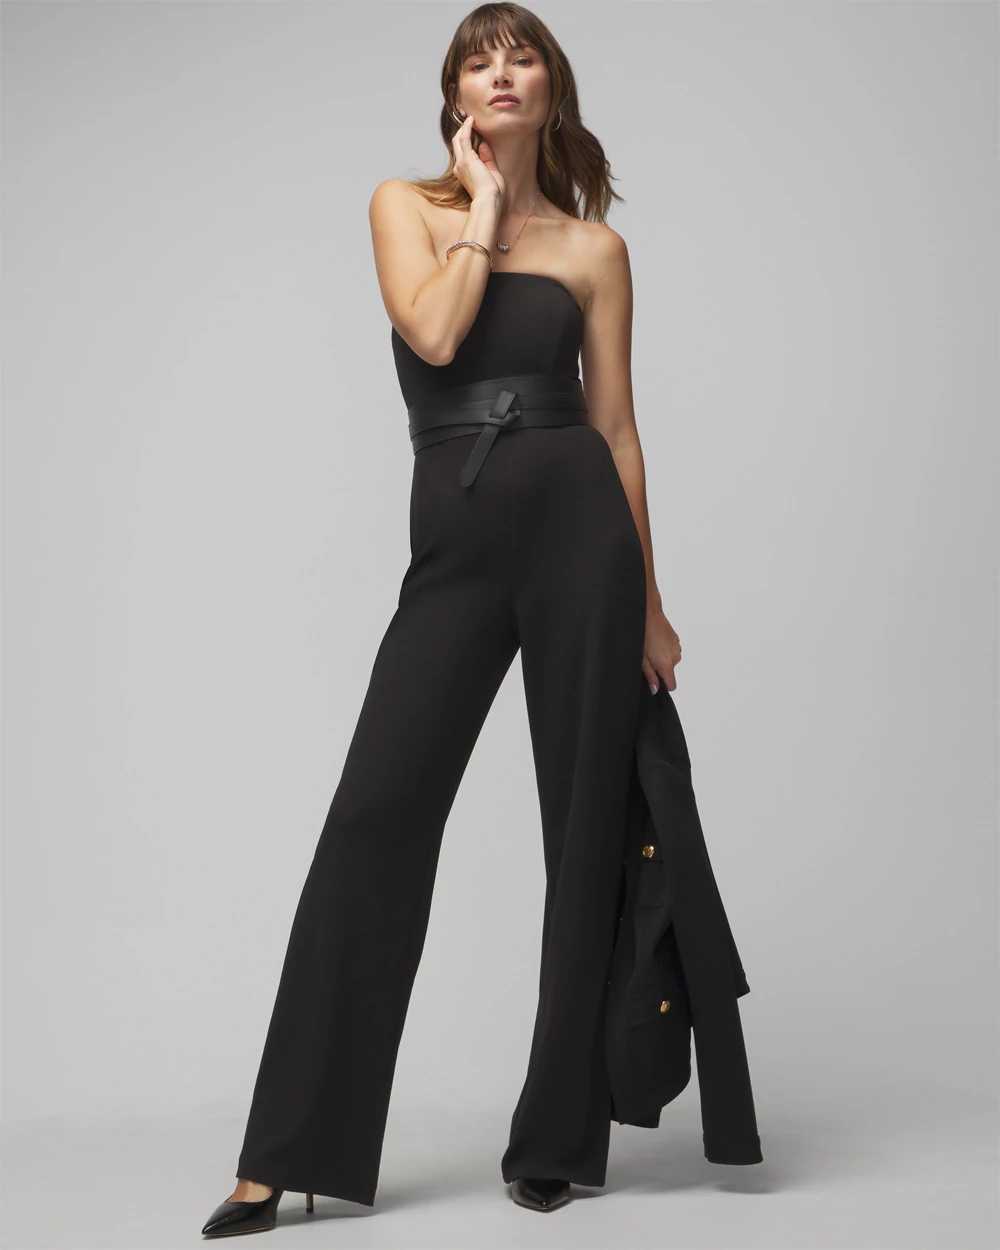 Strapless Belted Jumpsuit click to view larger image.